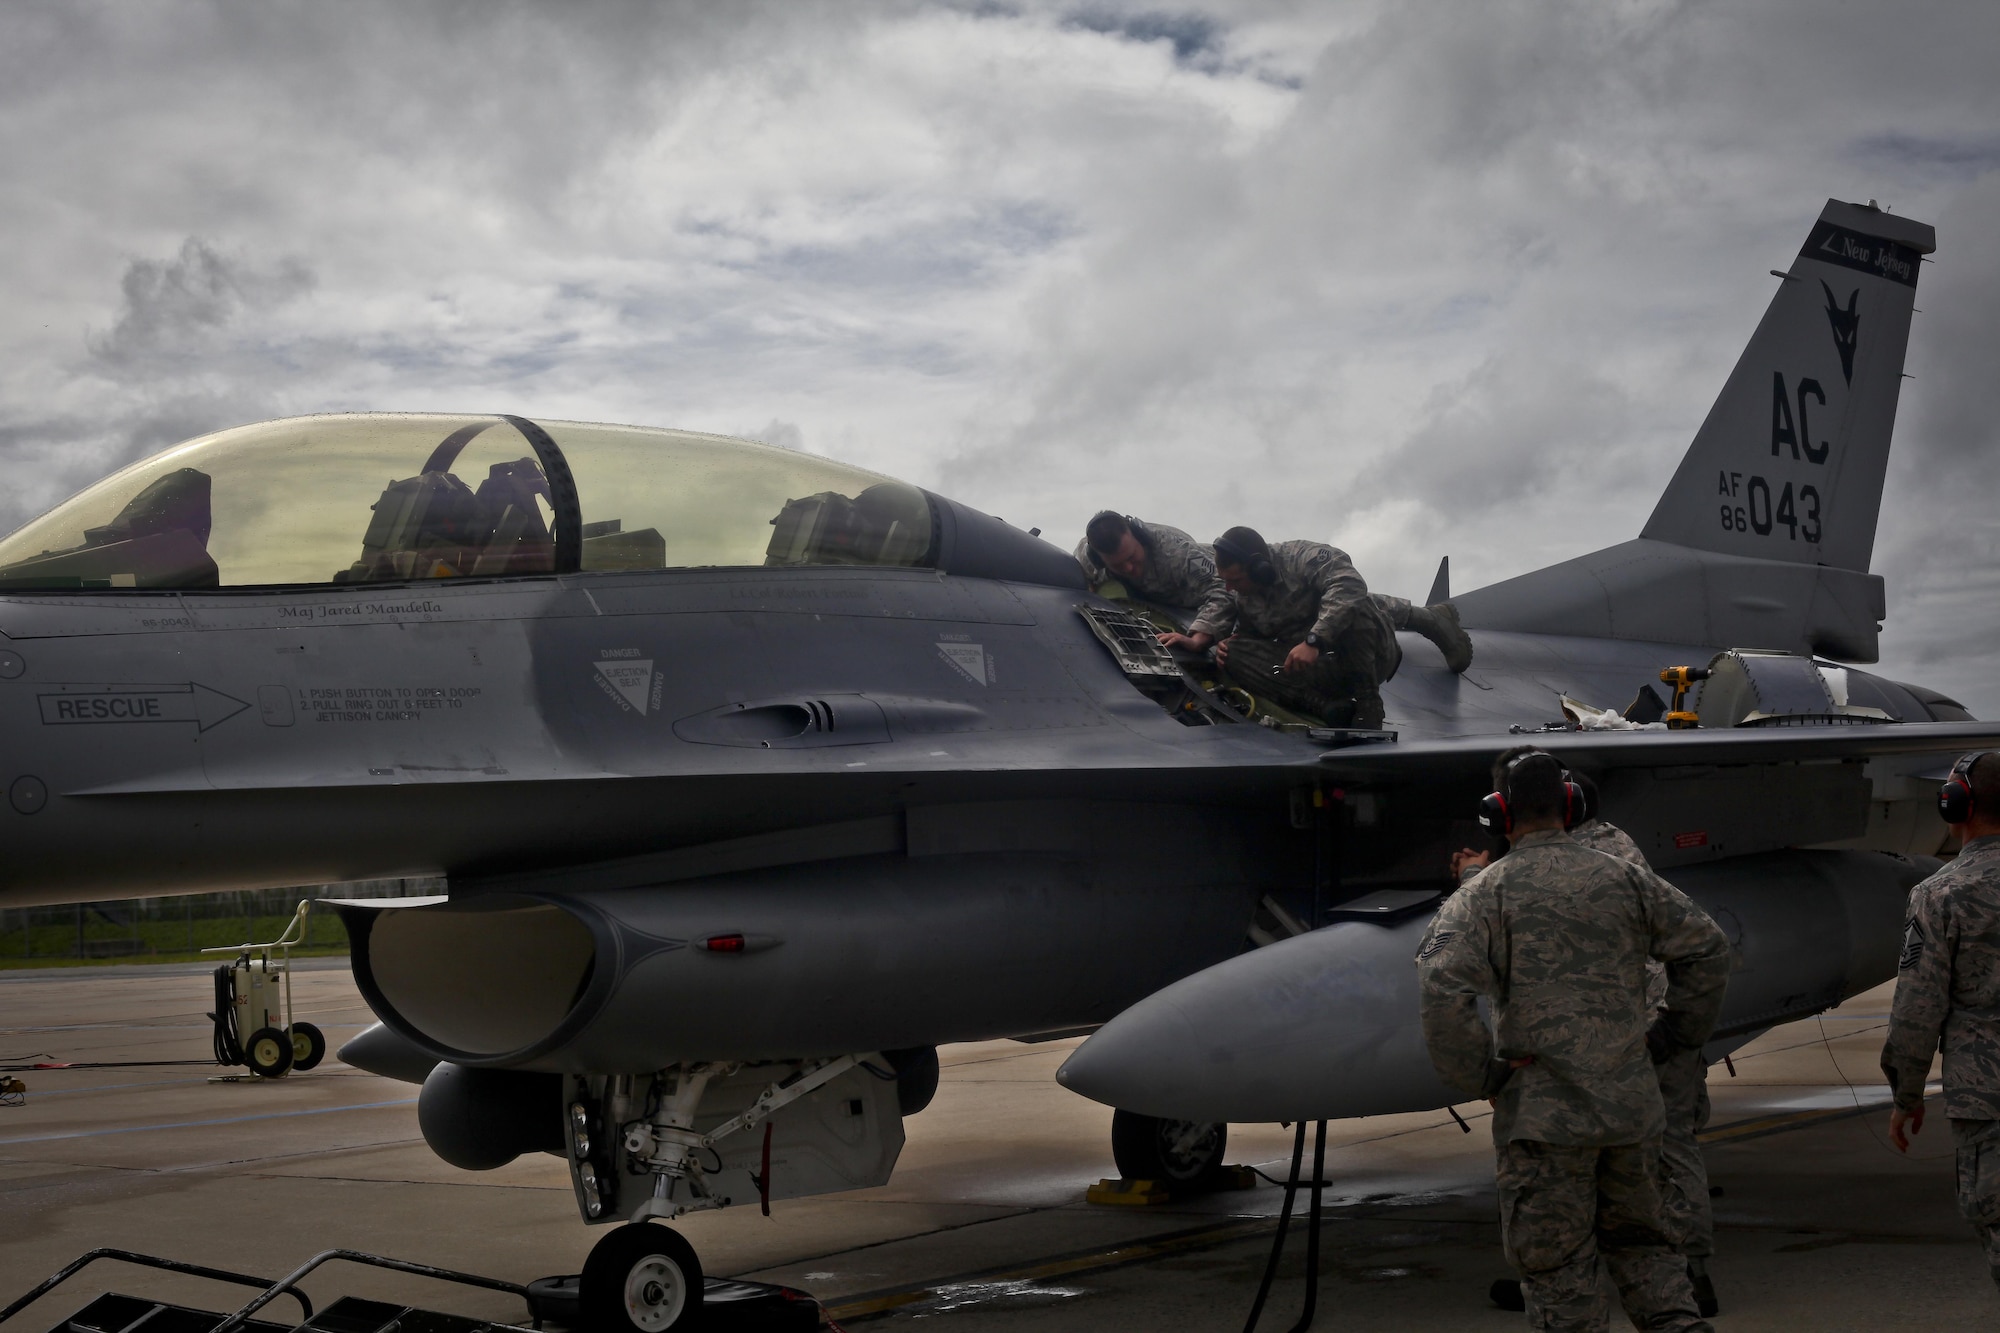 A New Jersey National Guard F-16D Fighting Falcon from the 177th Fighter Wing is worked on prior to a mission during a three-day Aeropsace Control Alert CrossTell live-fly training exercise at Atlantic City Air National Guard Base, N.J., May 24, 2017. Representatives from the Air National Guard fighter wings, Civil Air Patrol, and U.S. Coast Guard rotary-wing air intercept units will conduct daily sorties from May 23-25 to hone their skills with tactical-level air-intercept procedures. (U.S. Air National Guard photo by Master Sgt. Matt Hecht/Released)